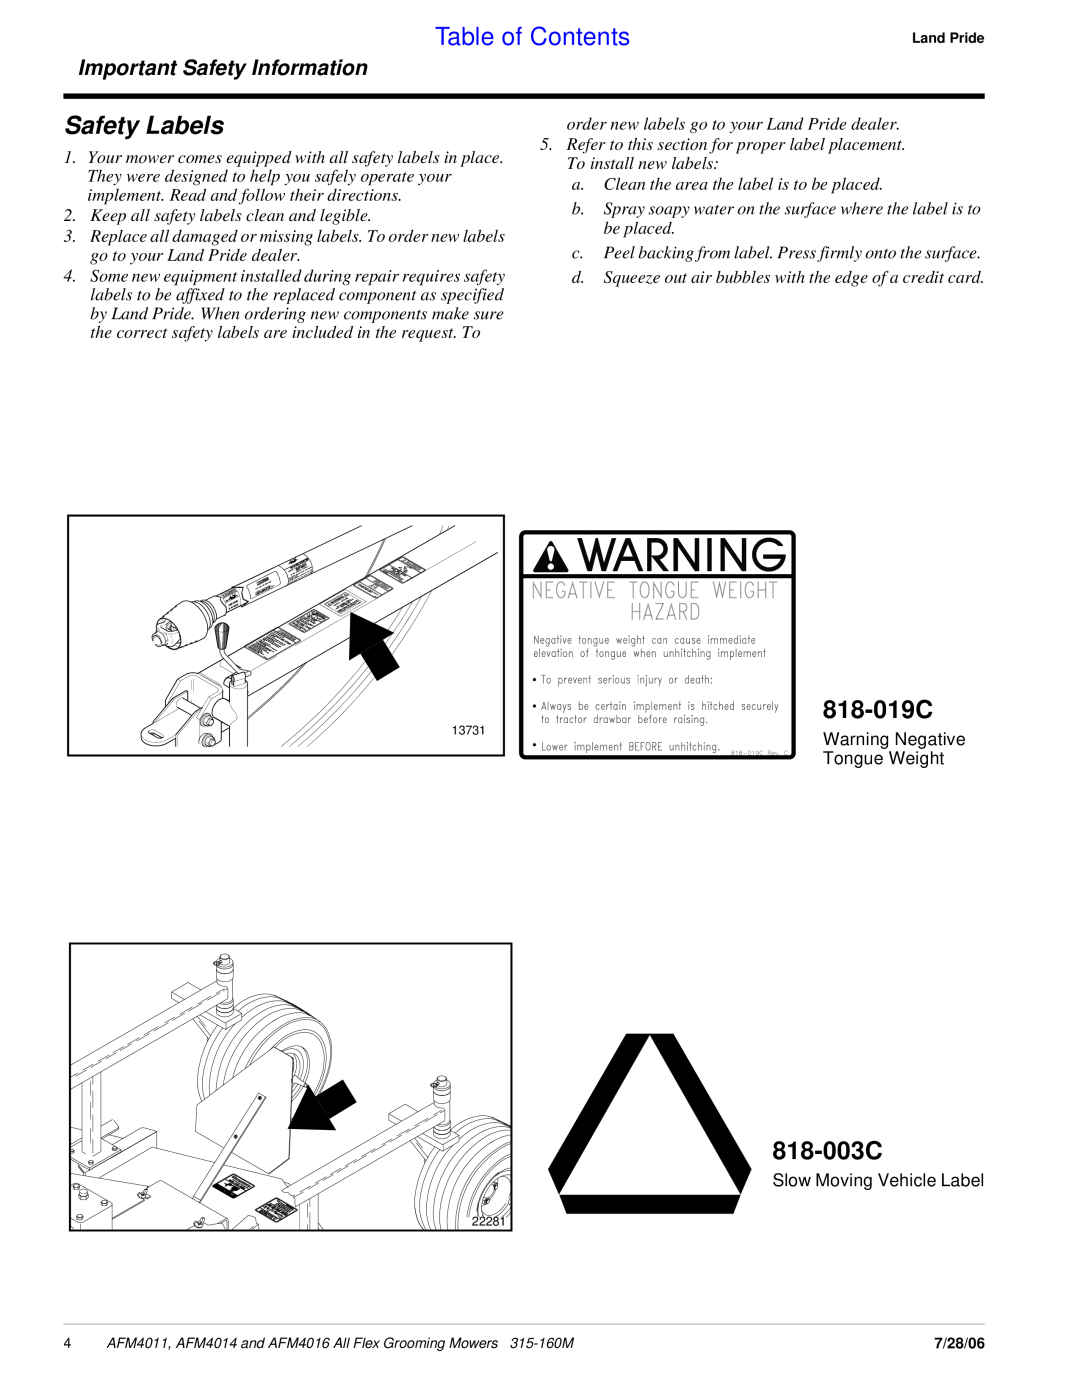 Land Pride AFM4016 manual Safety Labels, Table of Contents, 818-019C, 818-003C, Important Safety Information 